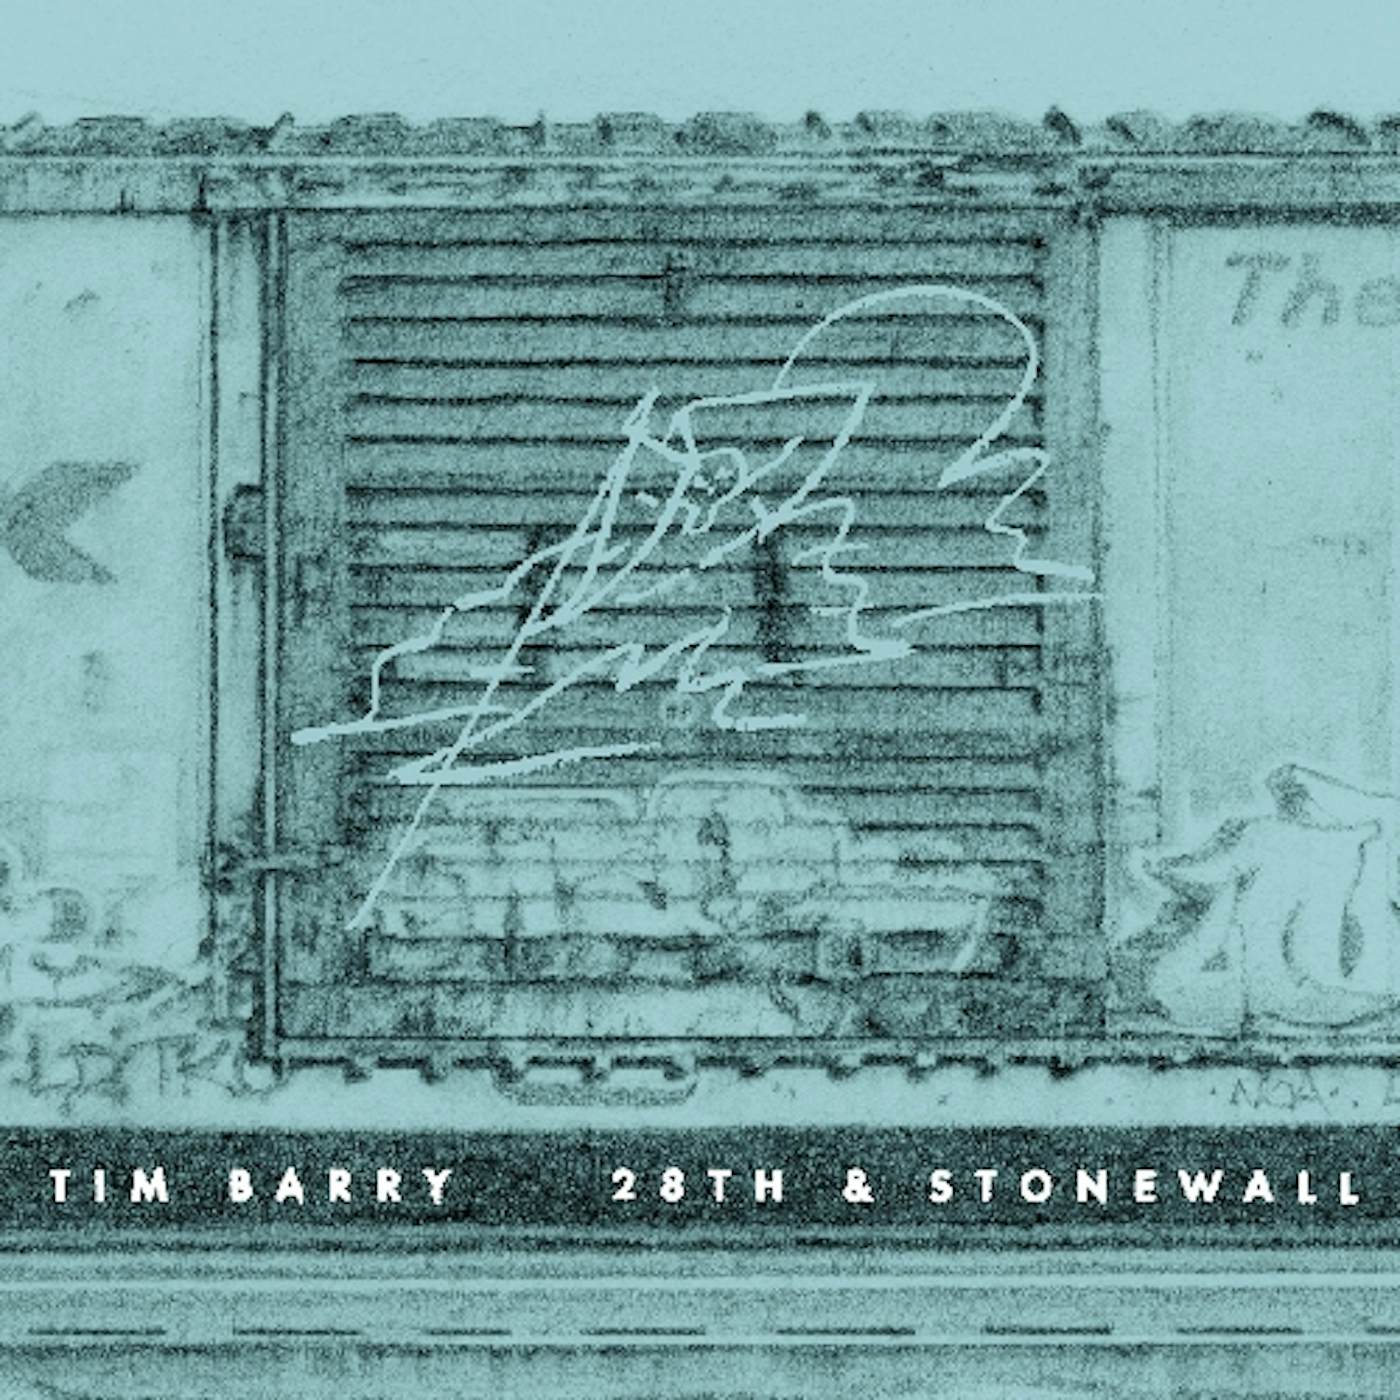 Tim Barry 28TH AND STONEWALL CD